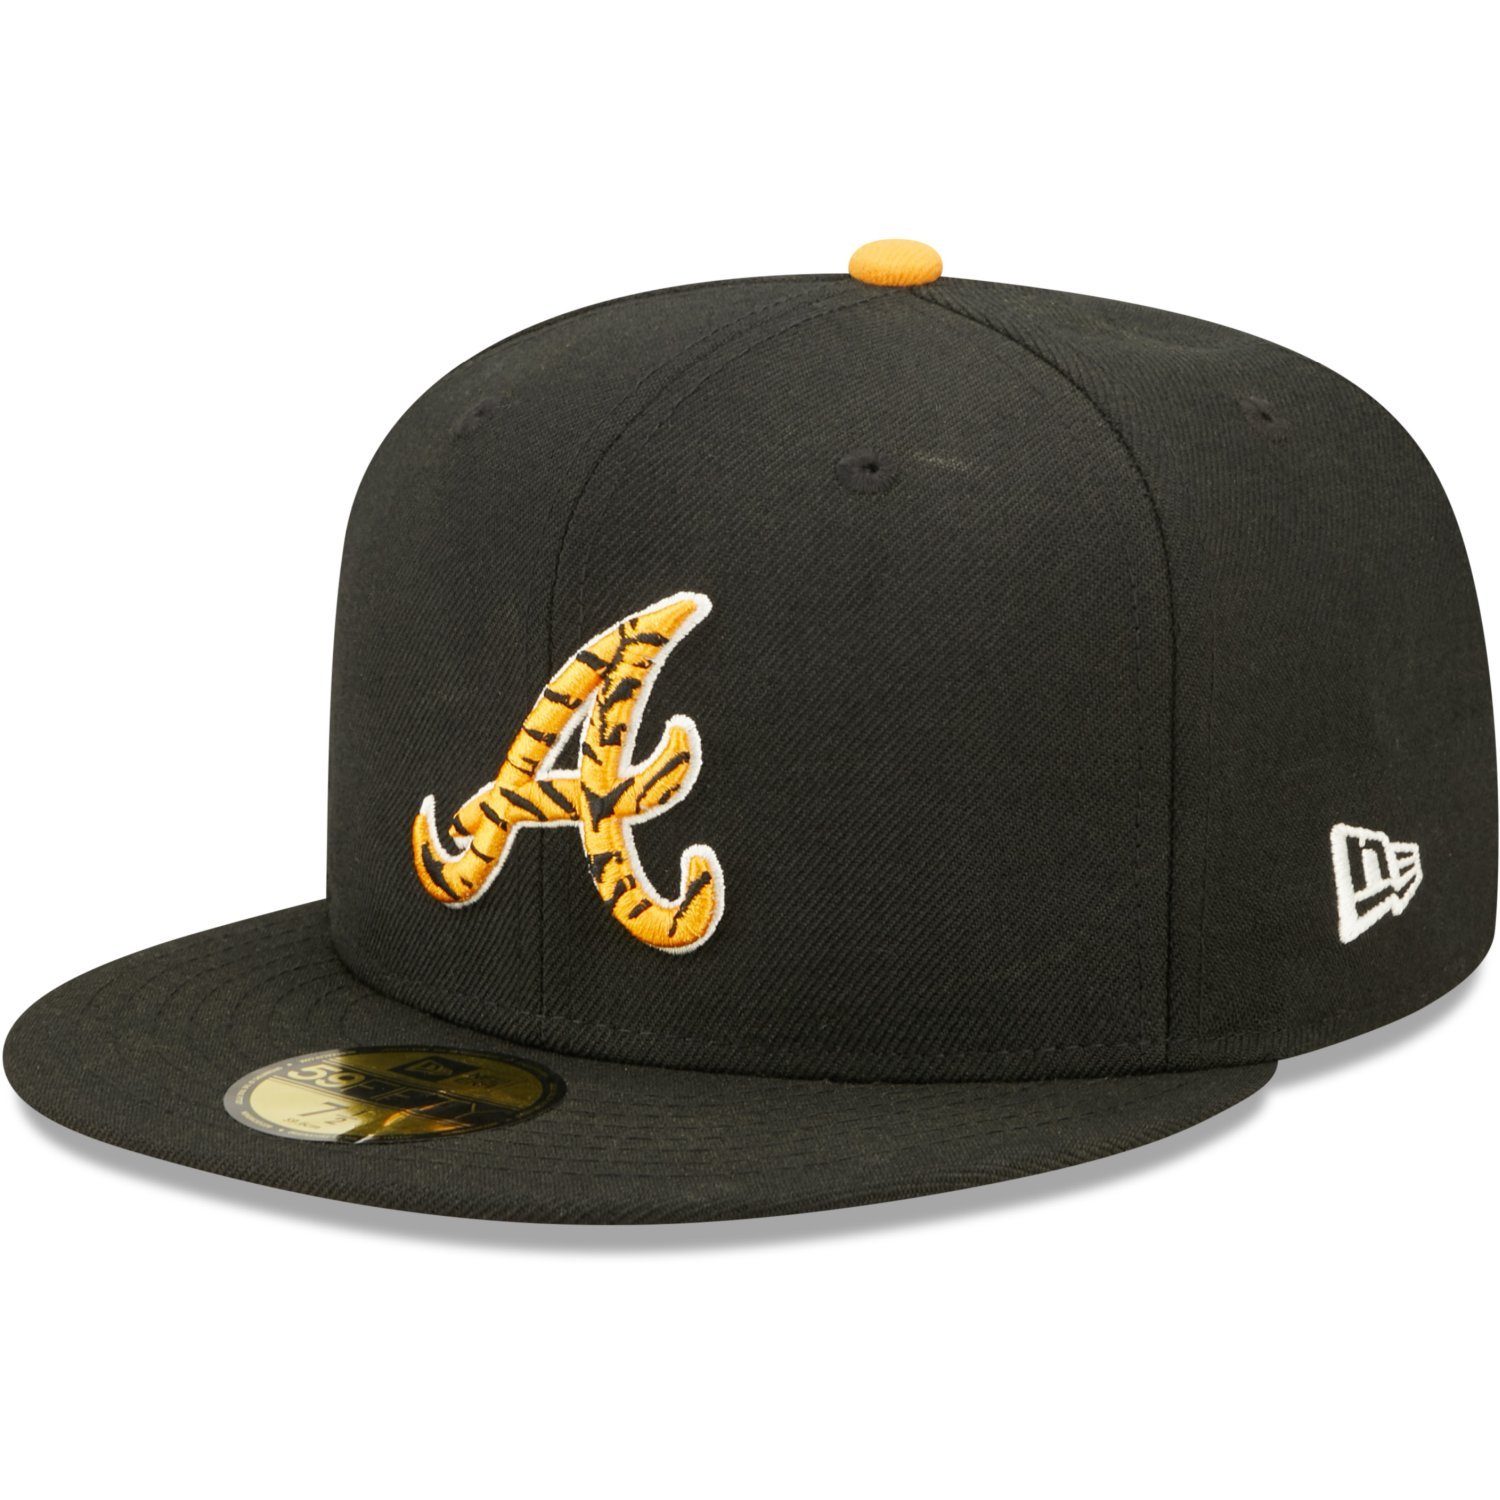 New 59Fifty Era Braves Cap Atlanta Fitted TIGERFILL